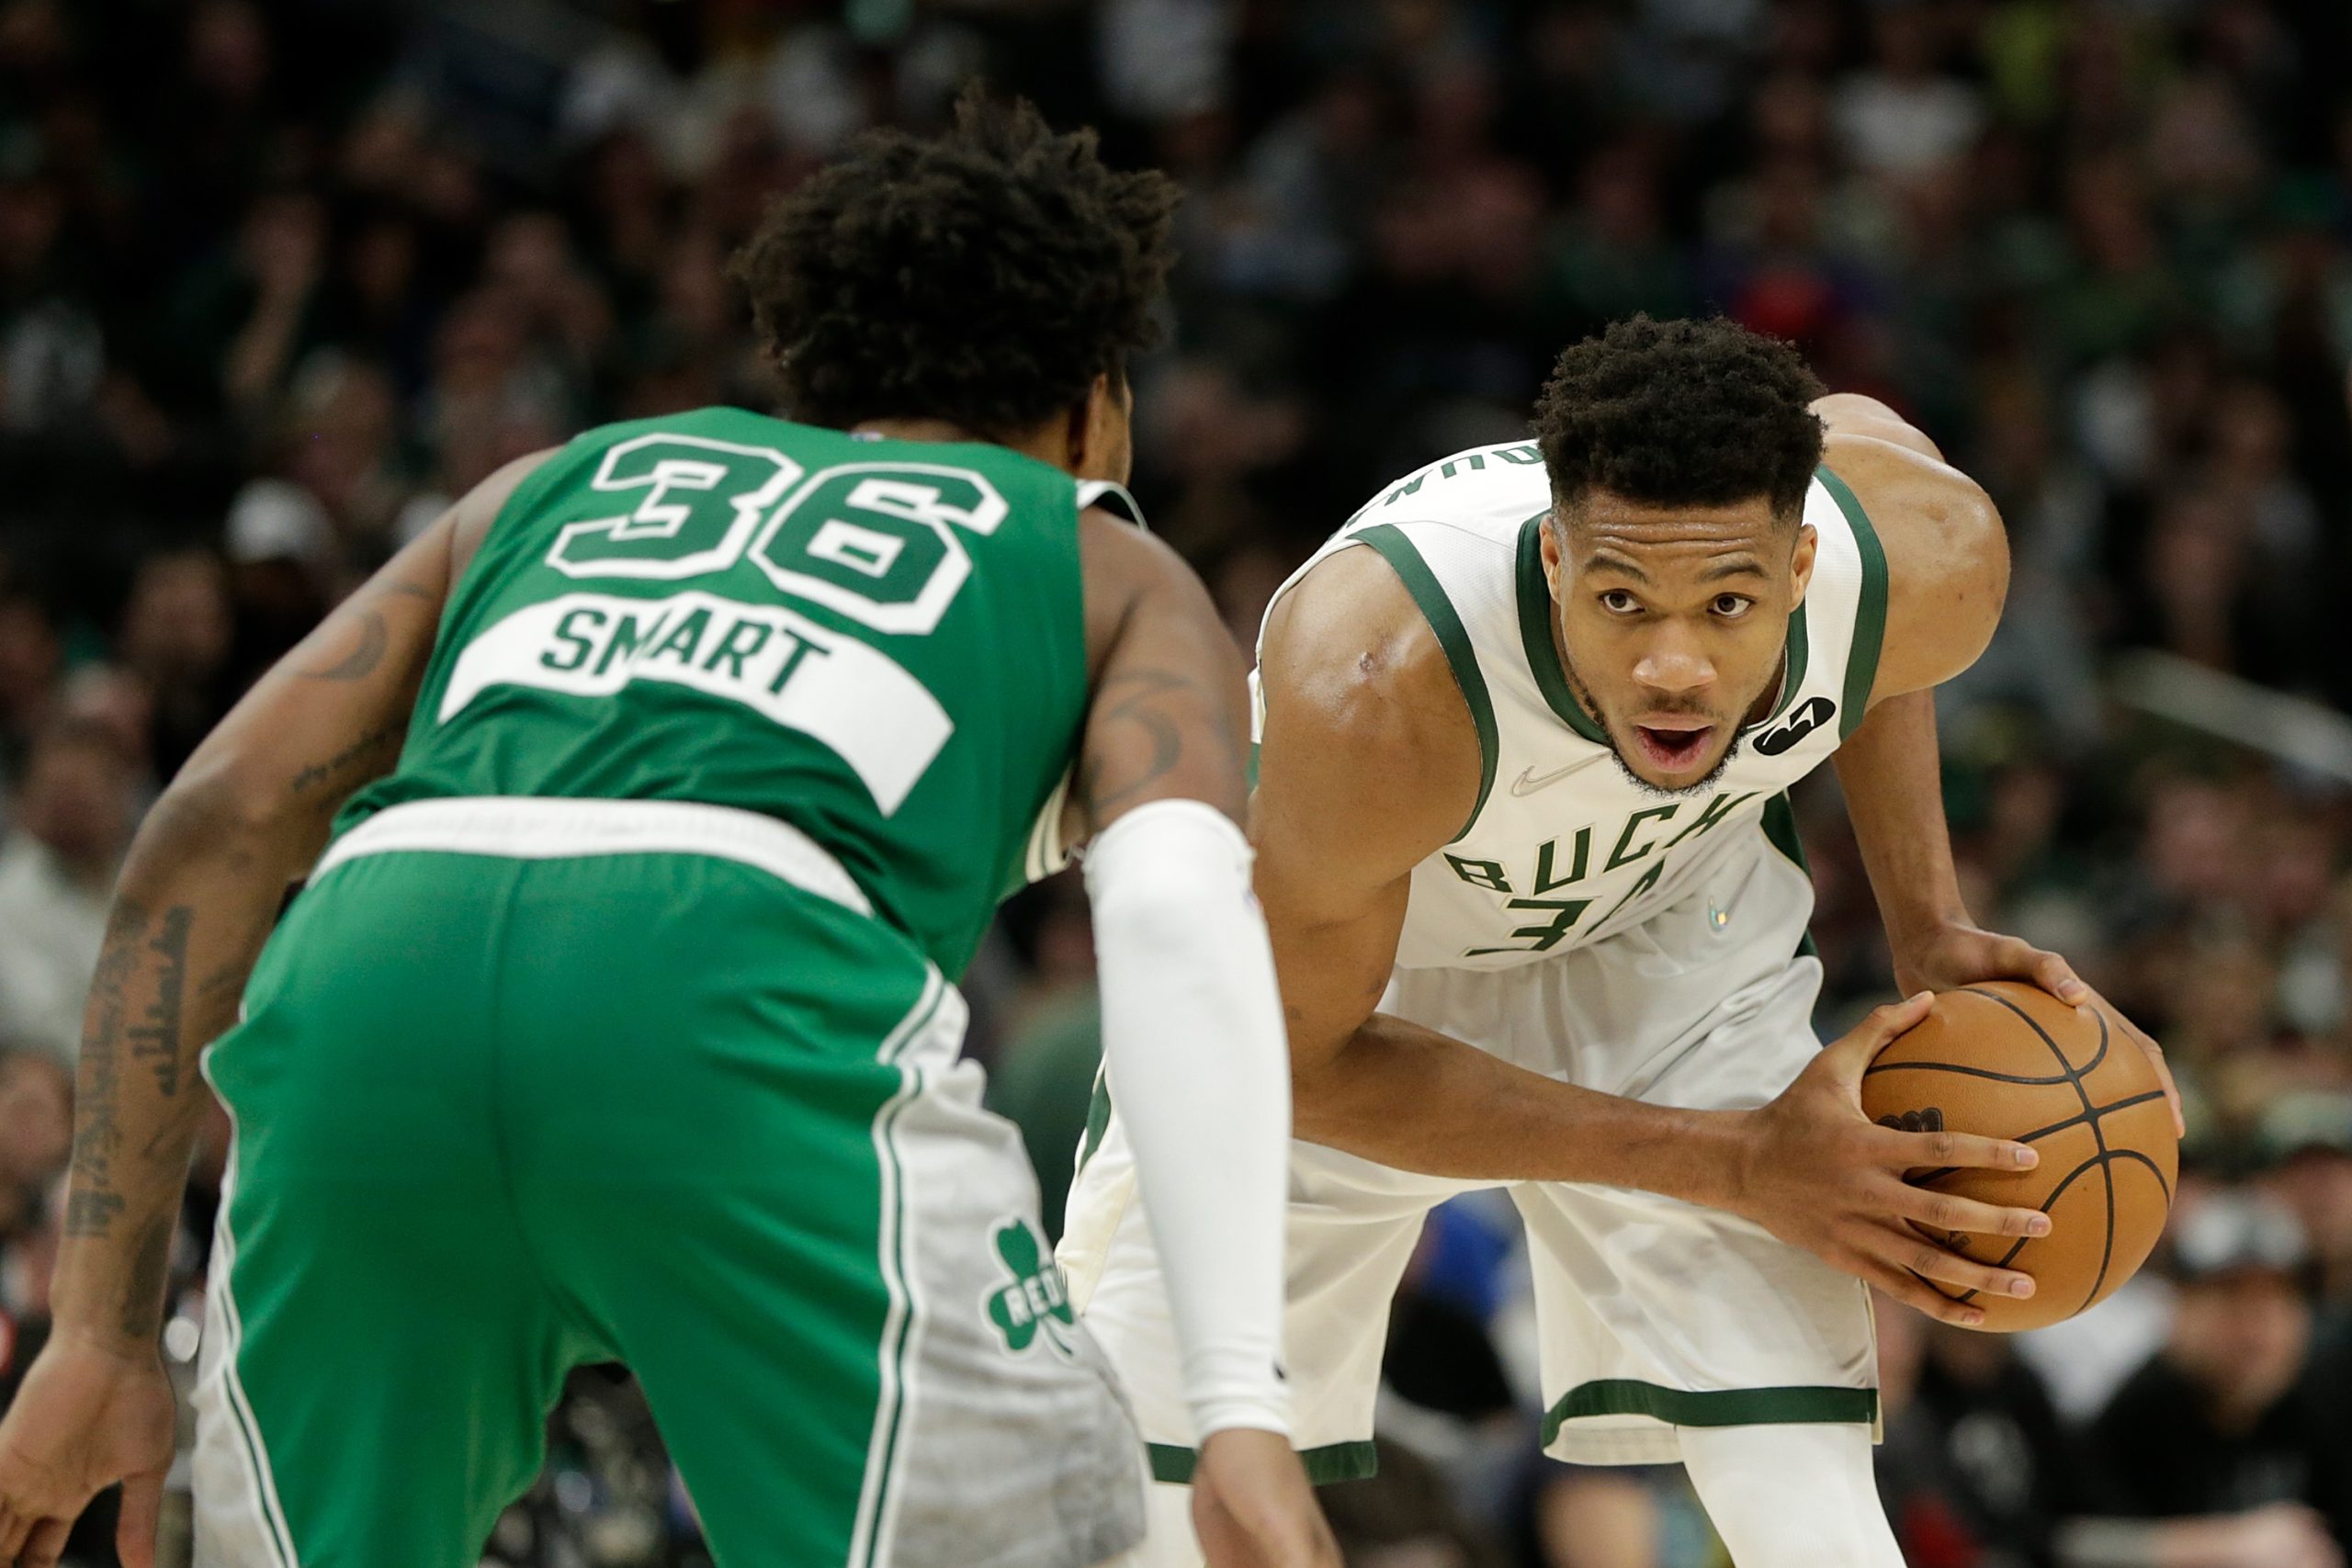 Giannis Antetokounmpo of the Milwaukee Bucks looks to drive while being guarded by Marcus Smart of the Boston Celtics.